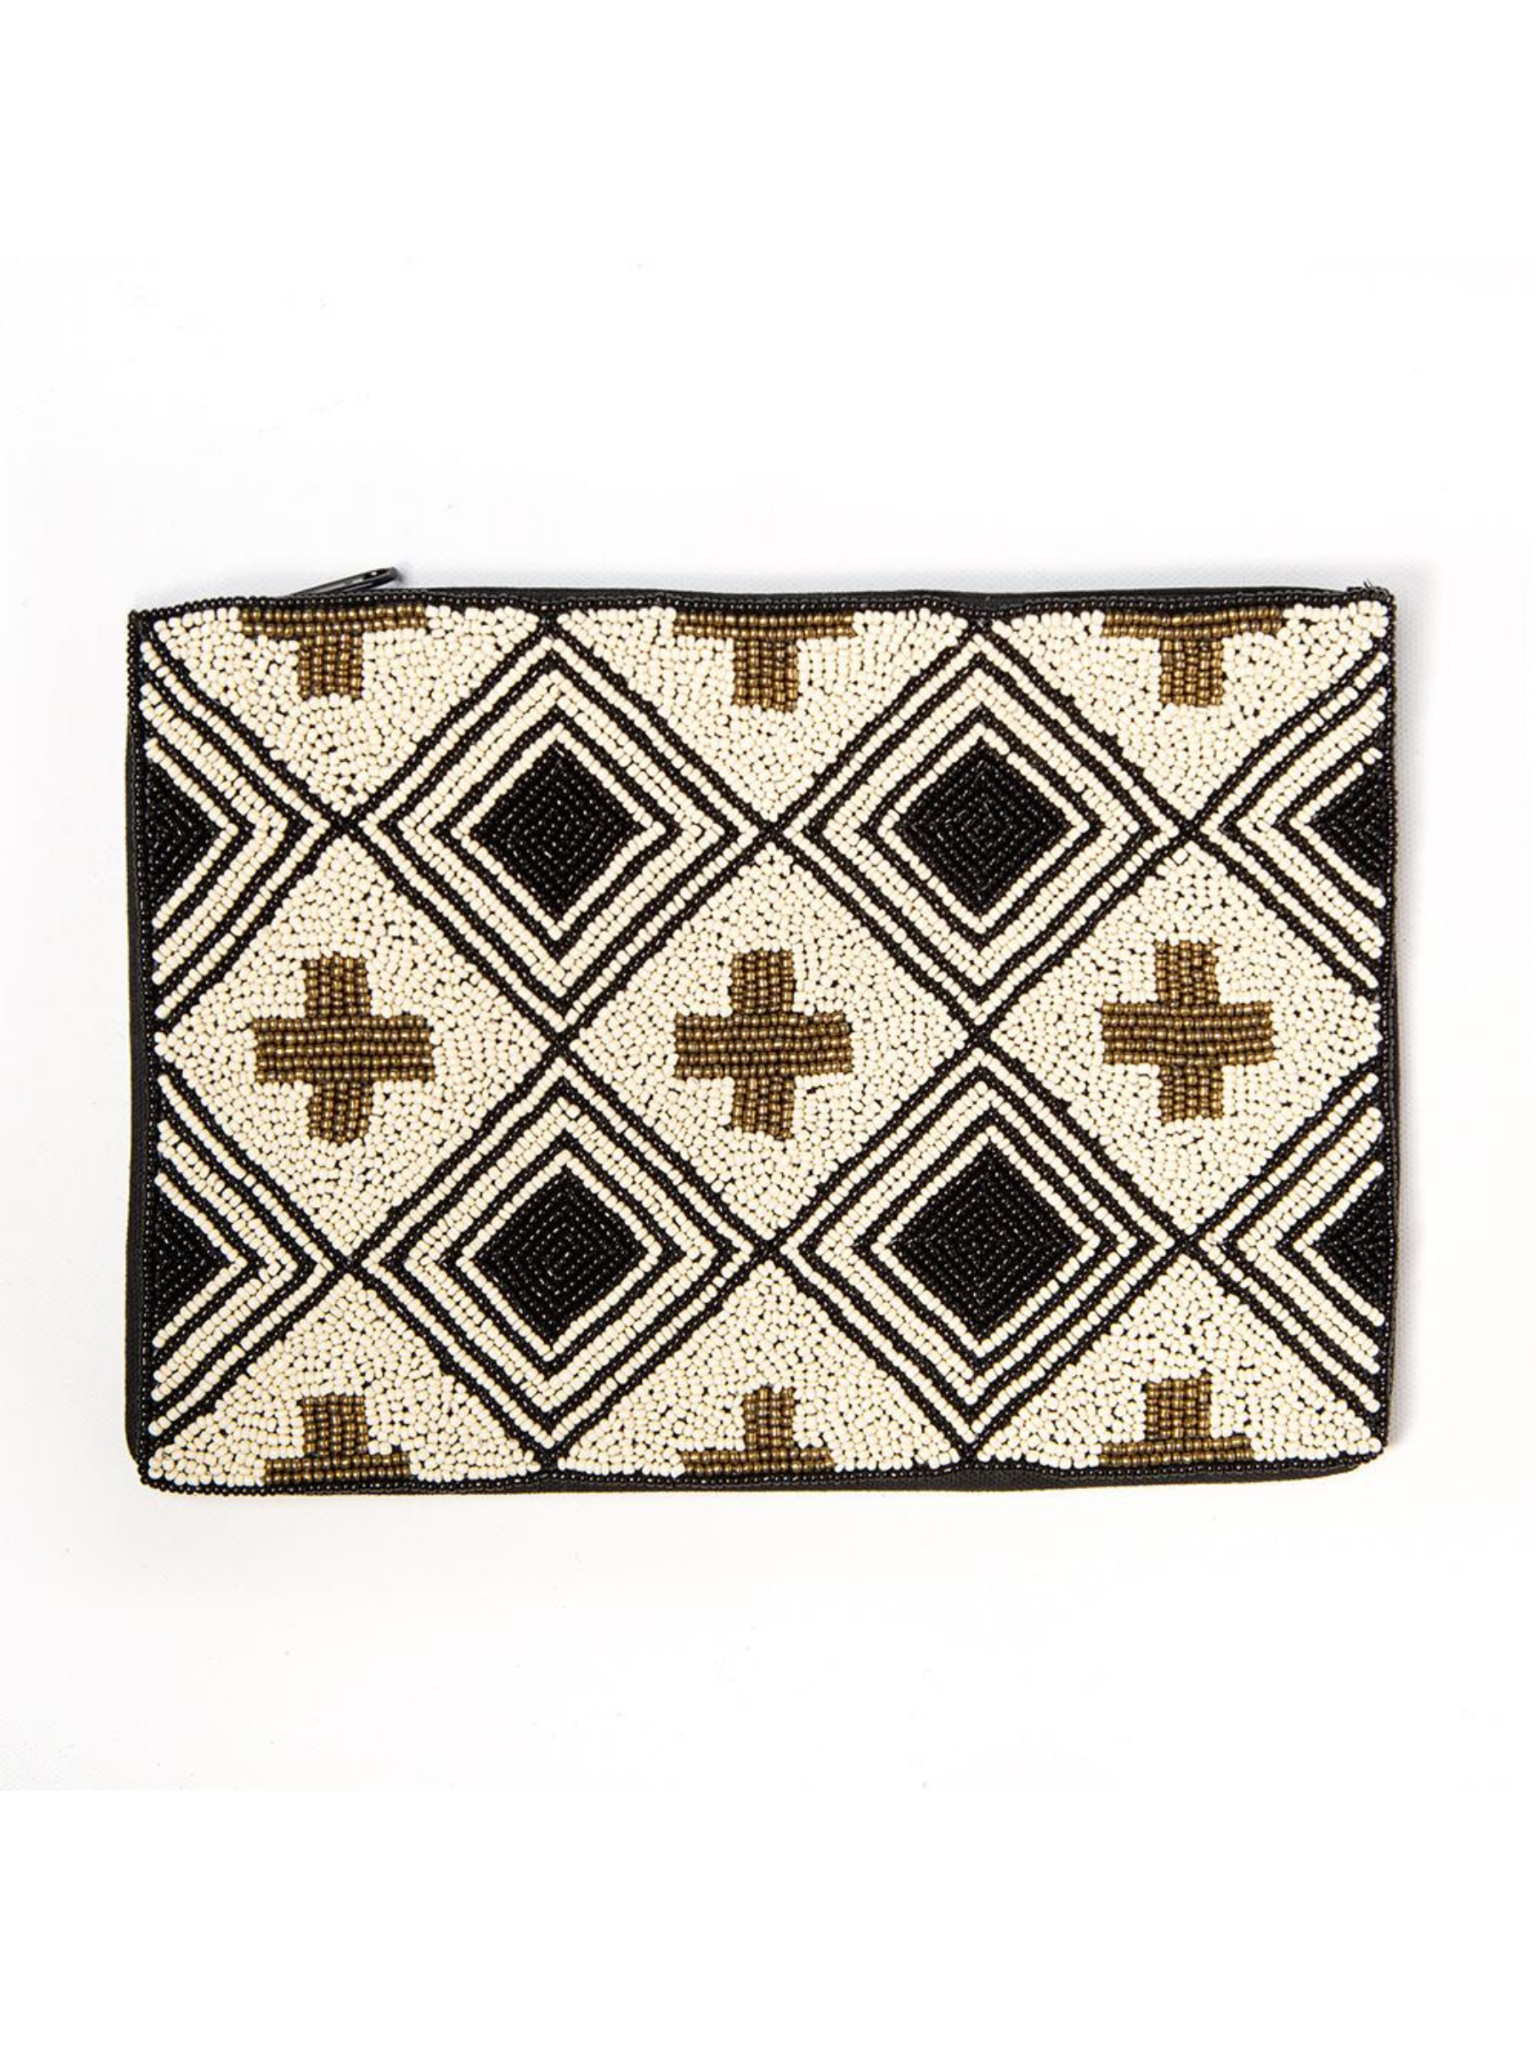 Black Ivory and Gold Cross Seed Bead Clutch